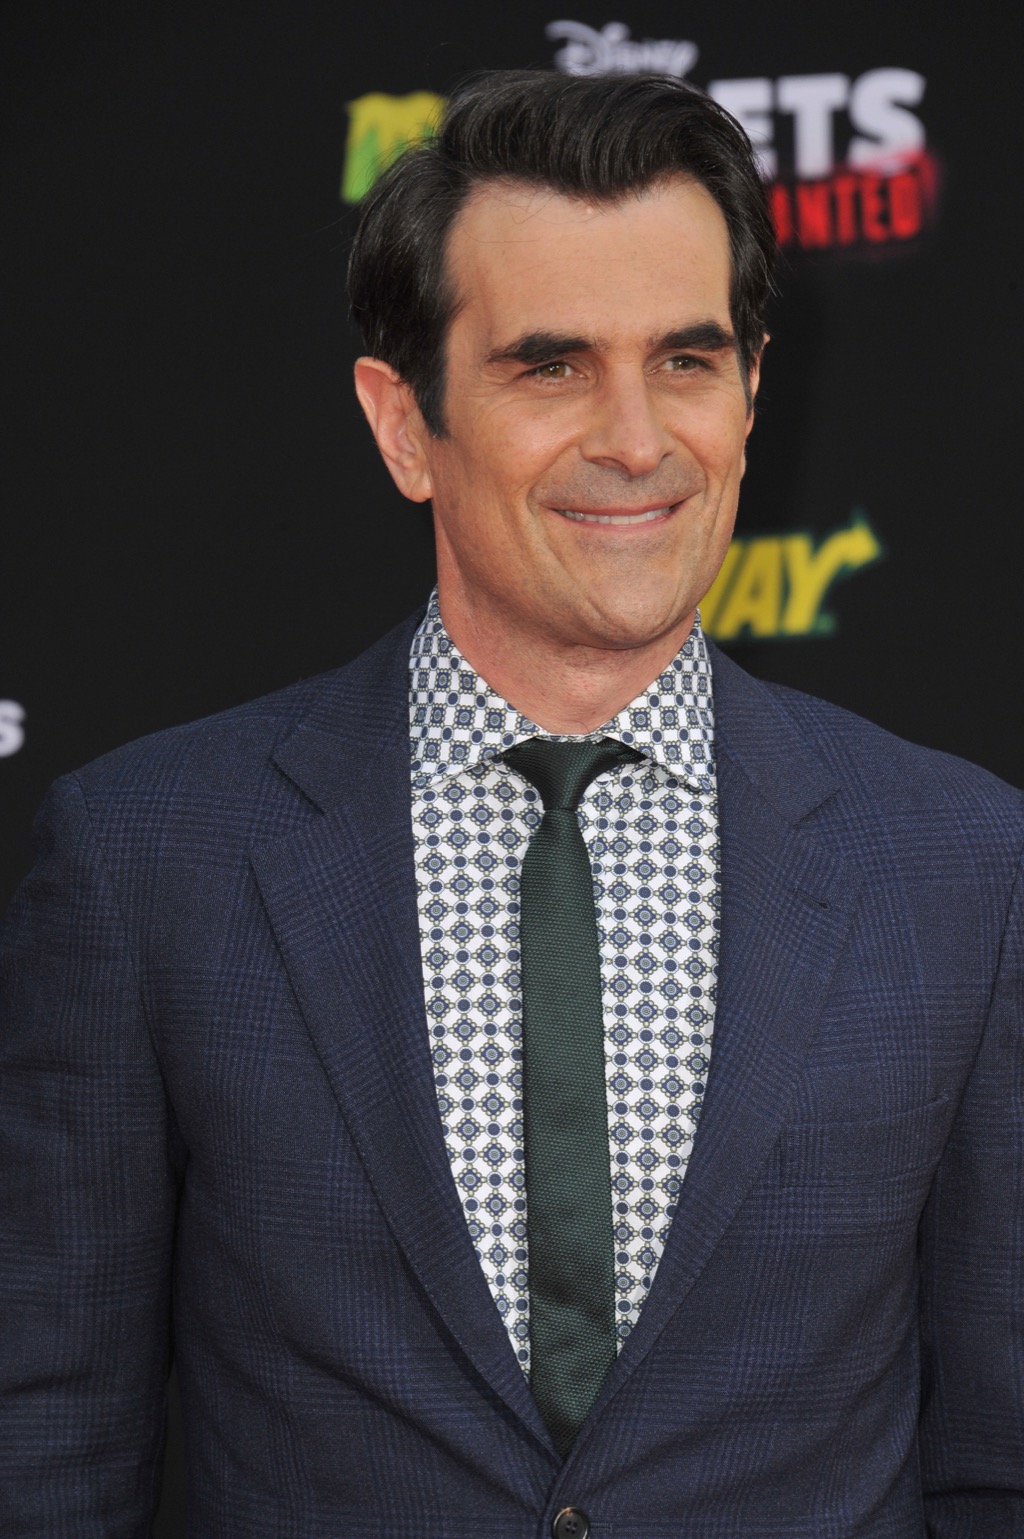 Ty Burrell became famous after 40